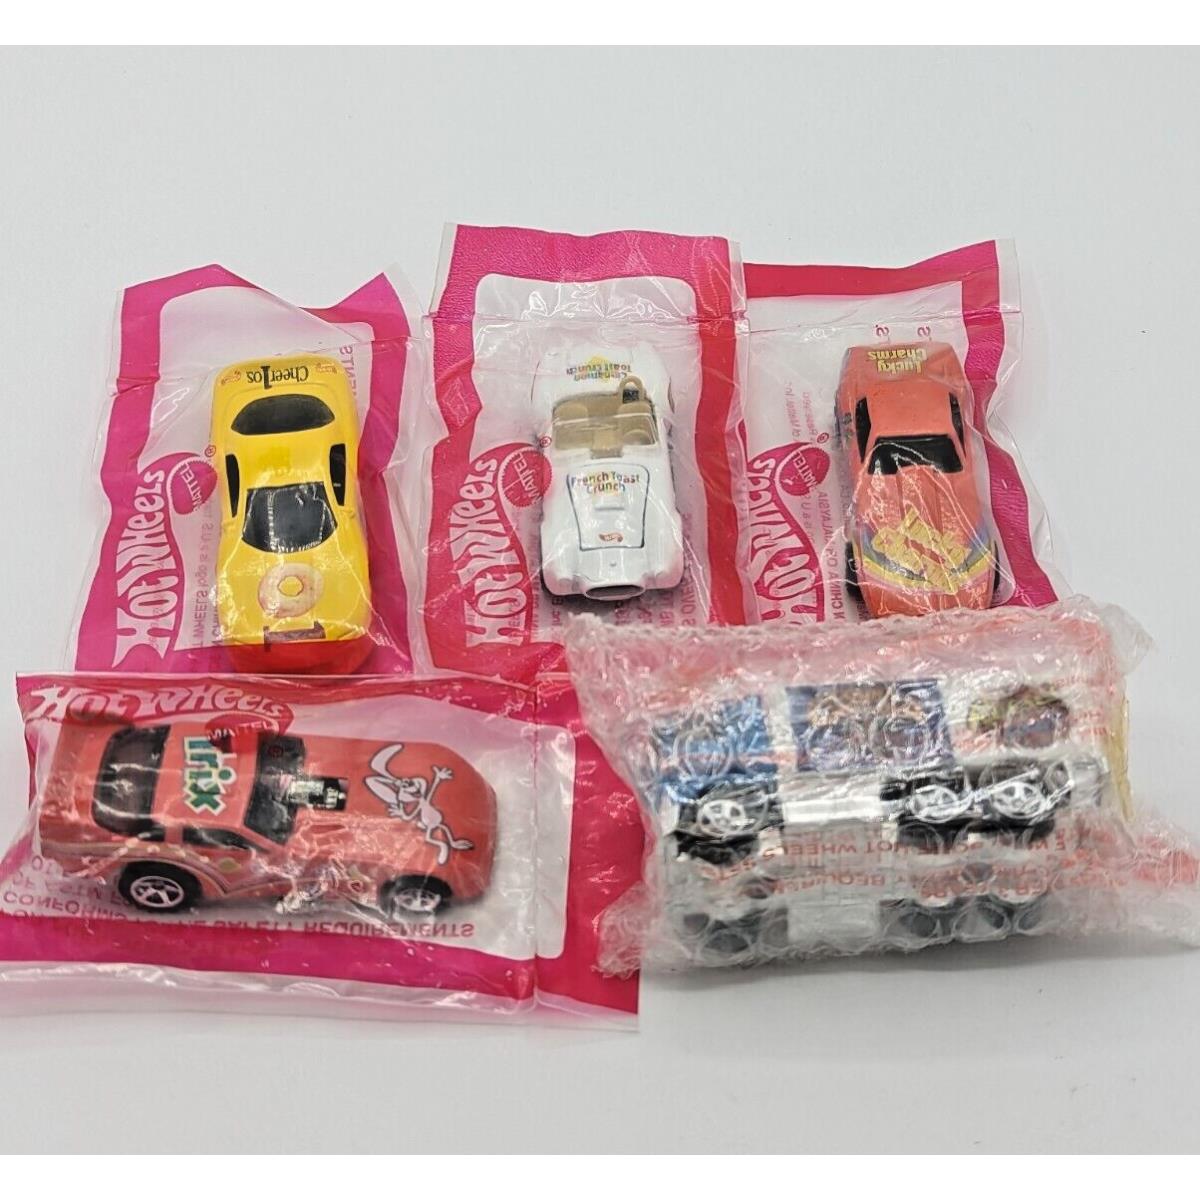 Hot Wheels 1997 General Mills Mail in Promo Cereal Cars Complete Set of 5